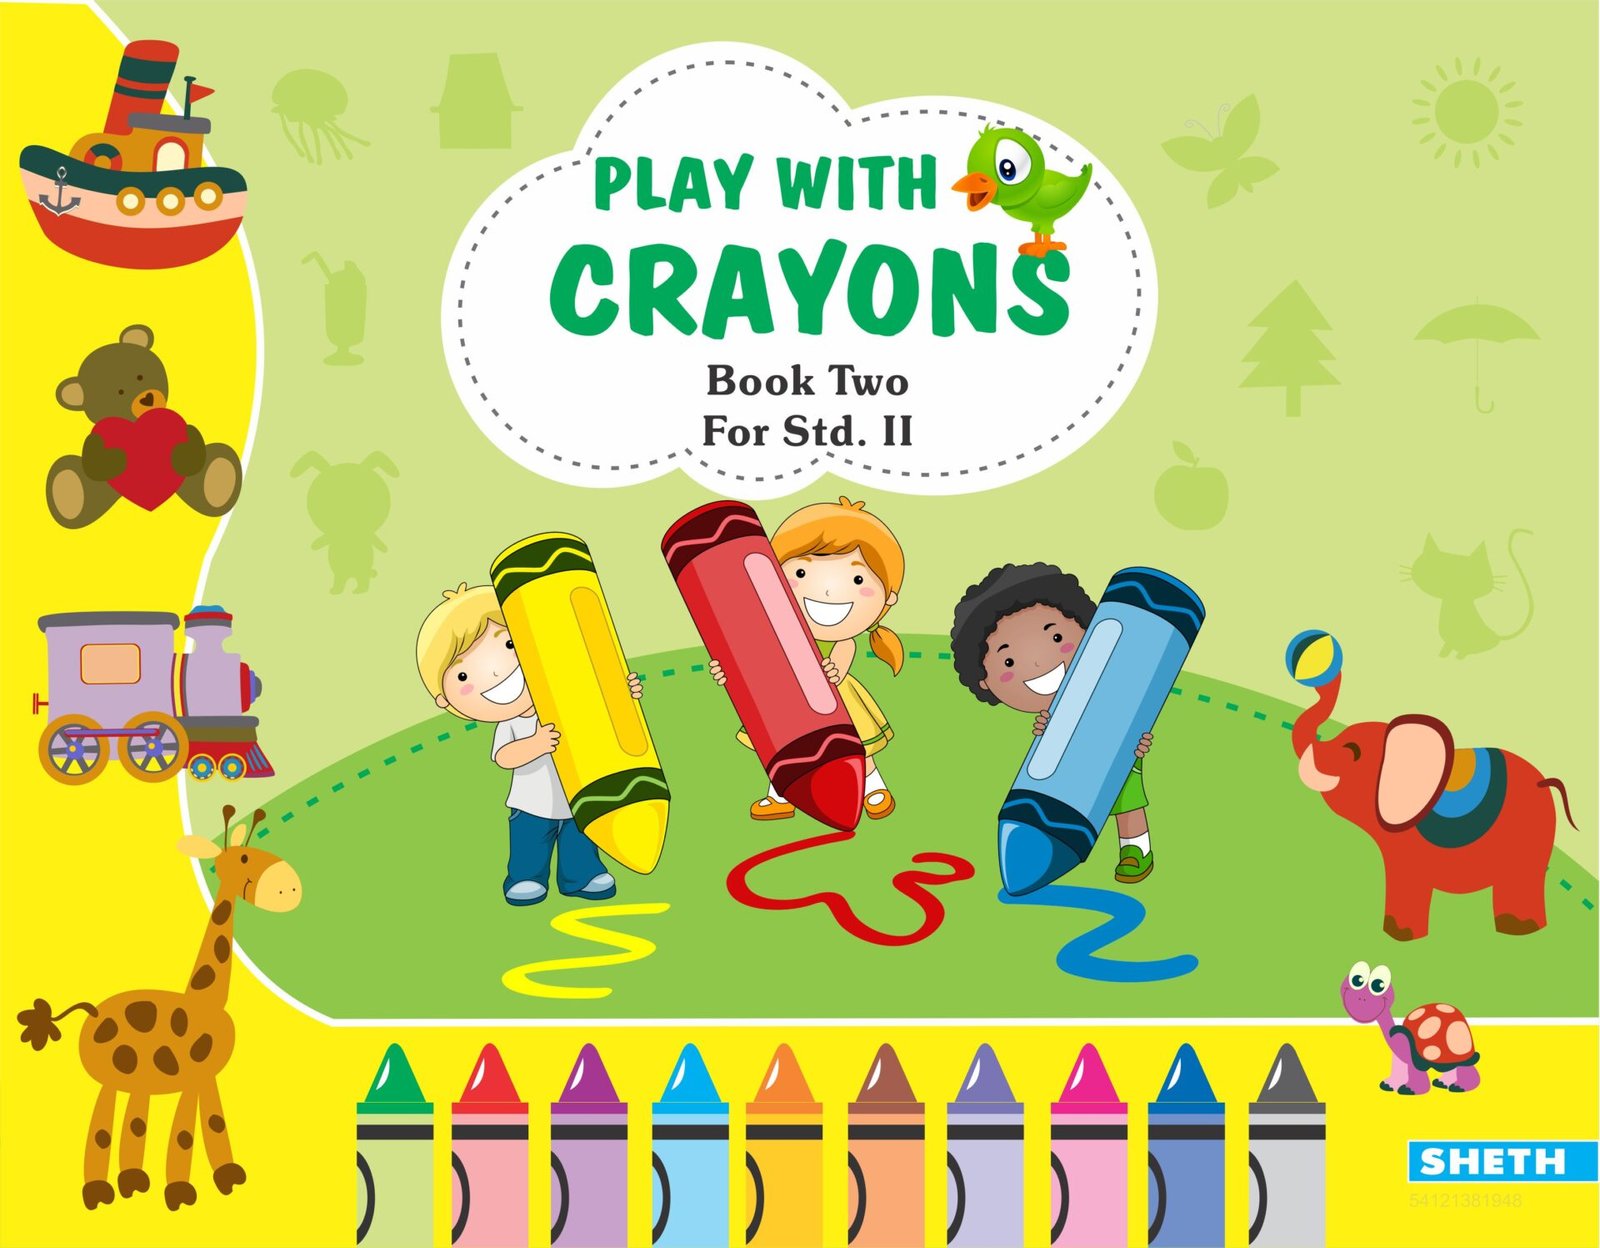 Sheth Books Play with Crayons Book 2 for Std. II 1